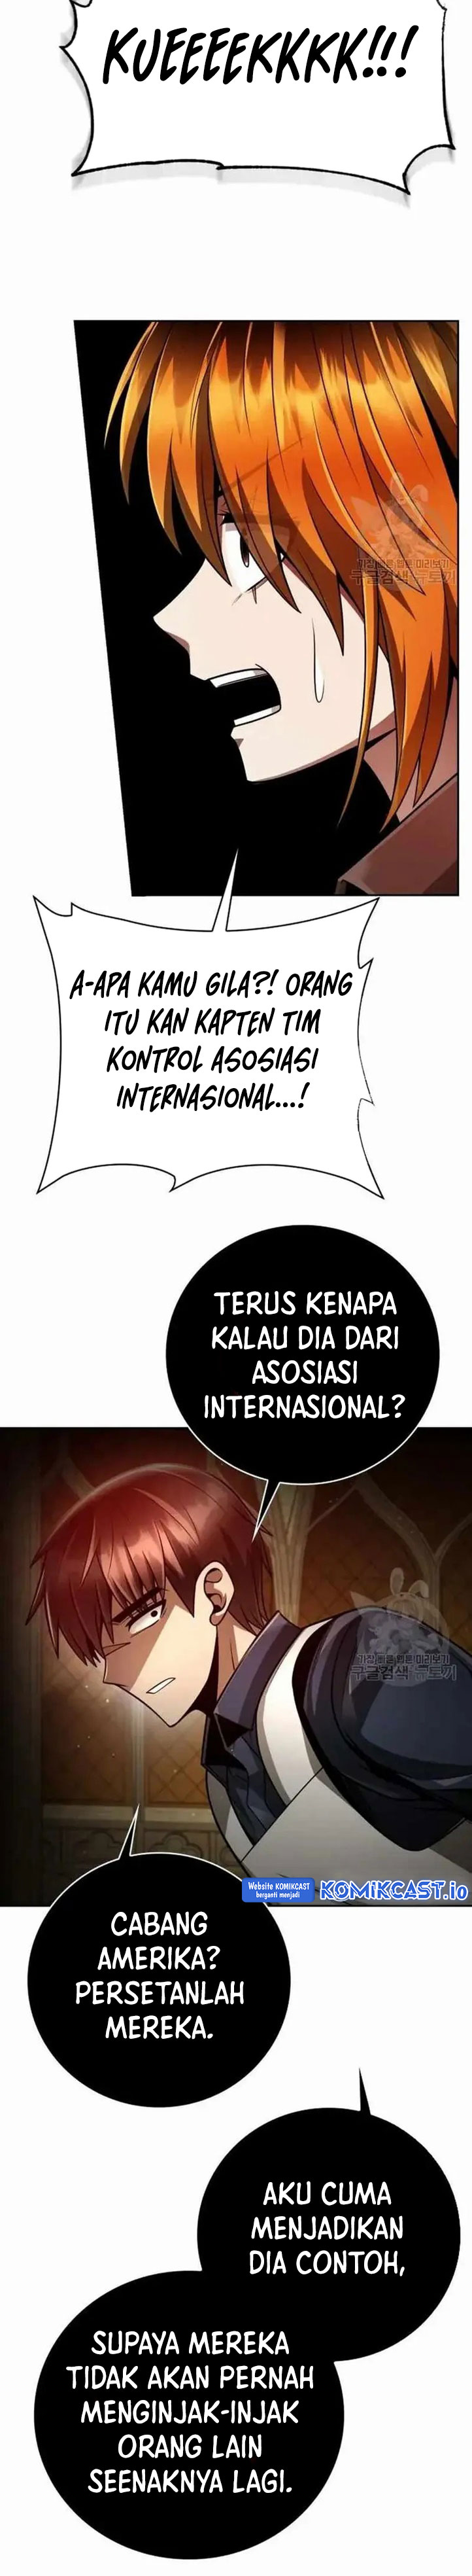 Dilarang COPAS - situs resmi www.mangacanblog.com - Komik clever cleaning life of the returned genius hunter 037 - chapter 37 38 Indonesia clever cleaning life of the returned genius hunter 037 - chapter 37 Terbaru 21|Baca Manga Komik Indonesia|Mangacan